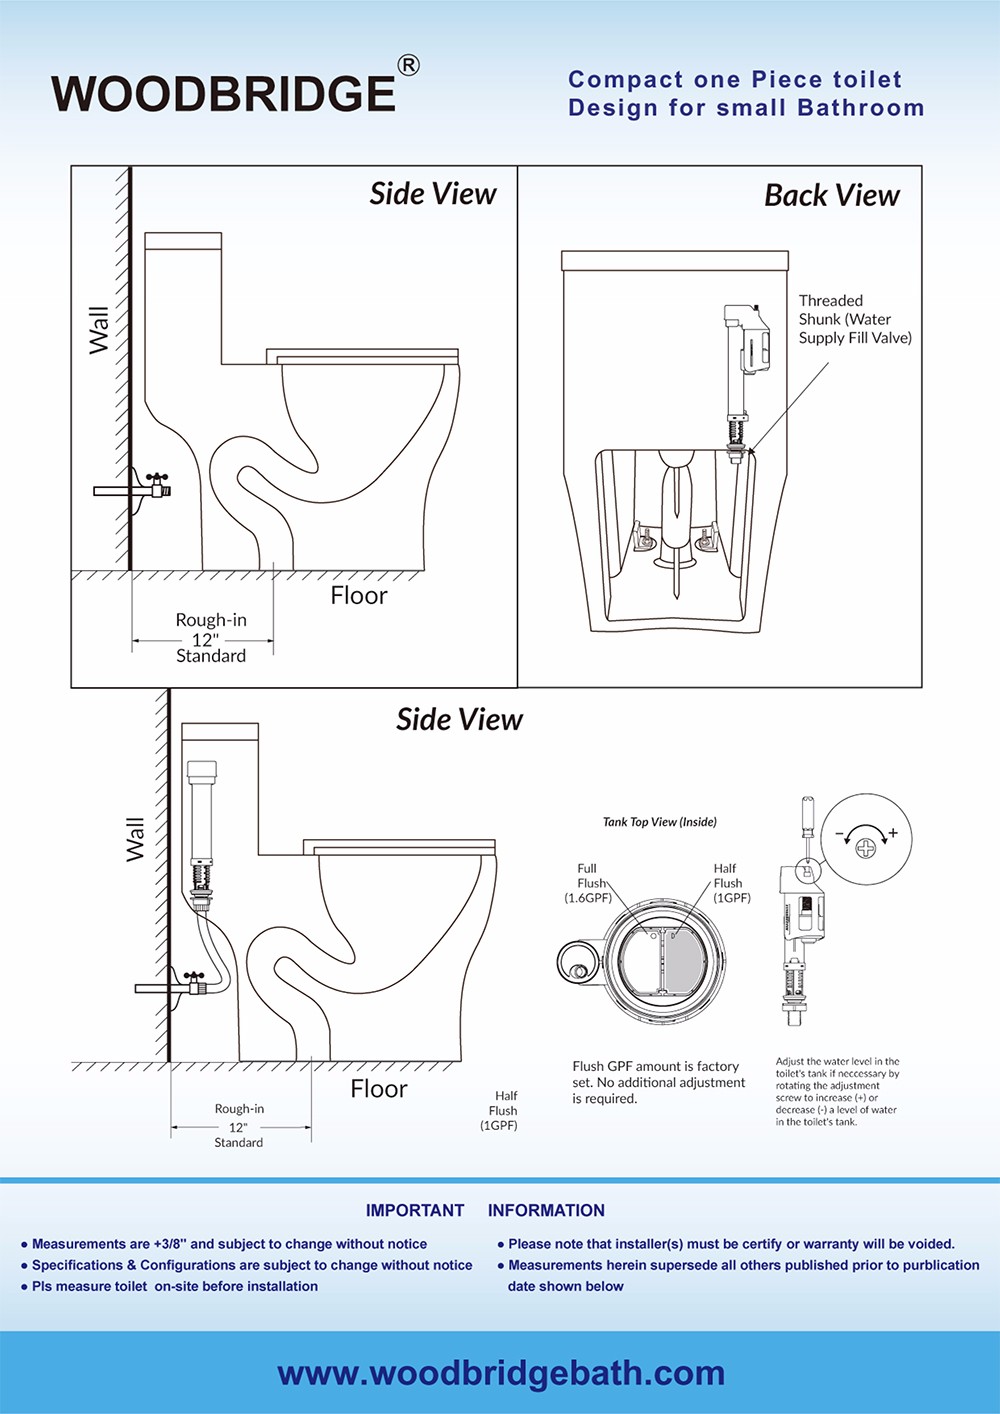  WOODBRIDGEBath T-0031 WOODBRIDGE T-0031 Short Compact Tiny One Piece Toilet with Soft Closing Seat, Small Toilet_10885